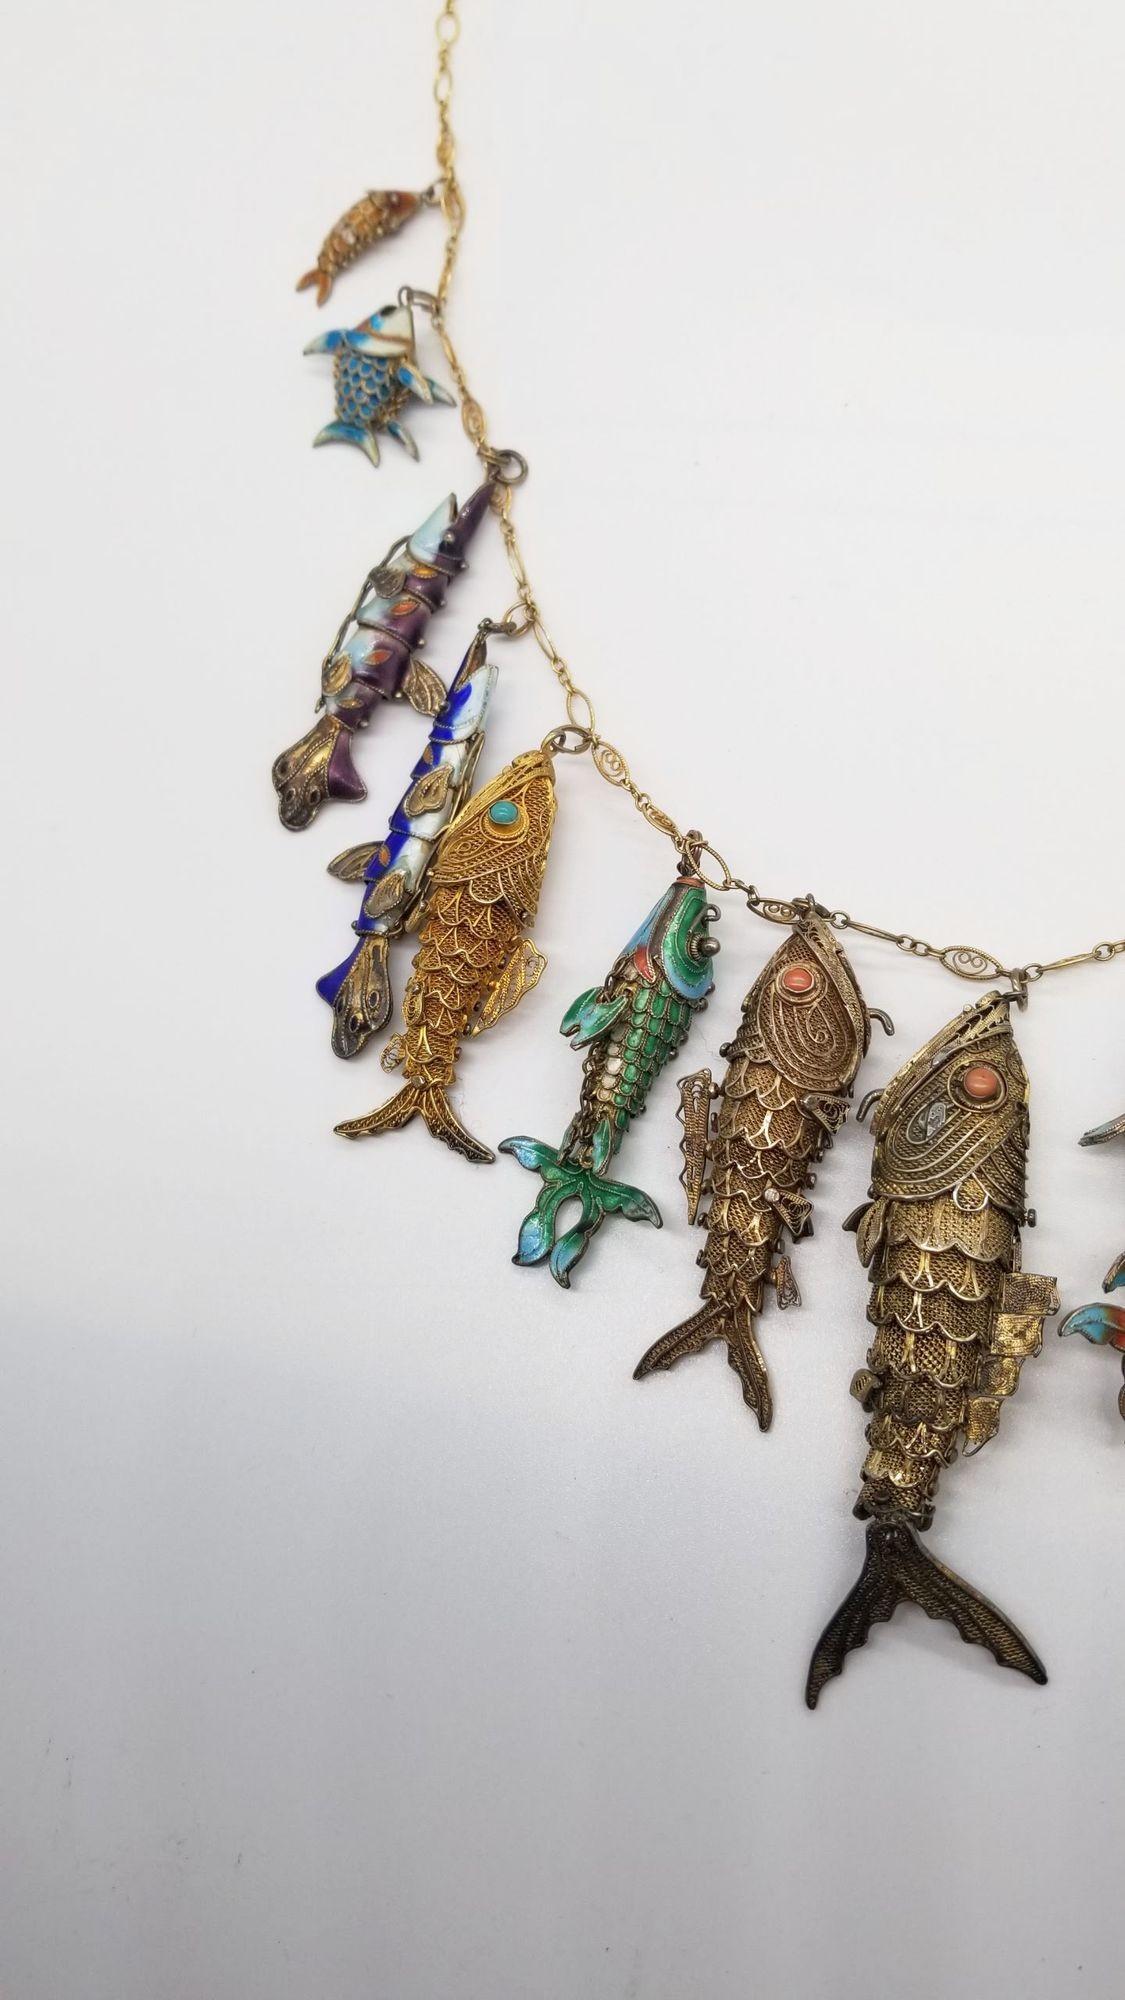 Metal Vintage Chinese Export Koi Fish Necklace from the 1920s-1940 For Sale